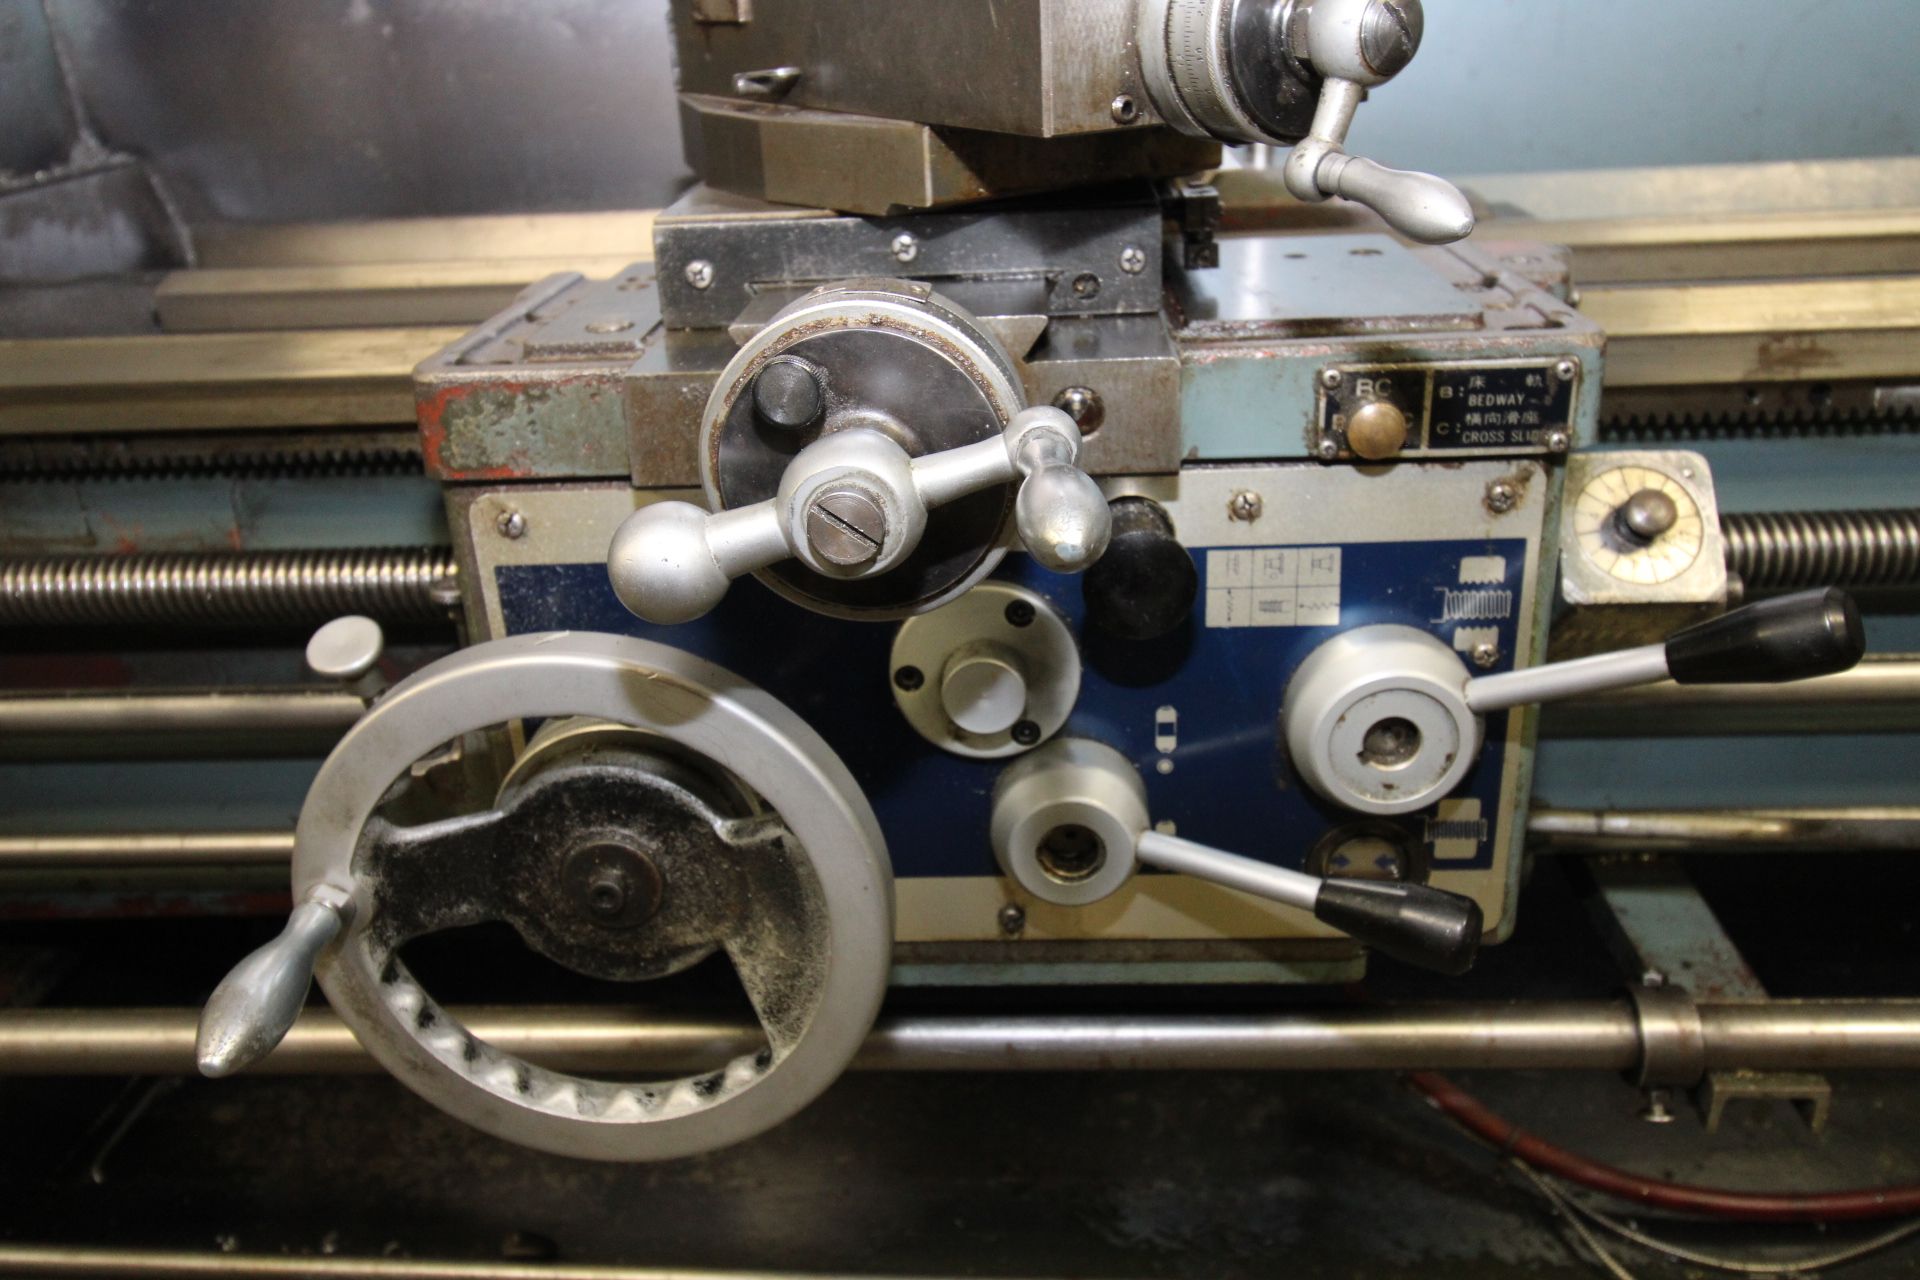 GAP BED ENGINE LATHE, KINGSTON 17” X 60”, new 2003, spds: 52-1350 RPM, 10” dia. 3-jaw chuck, 4-jaw - Image 6 of 15